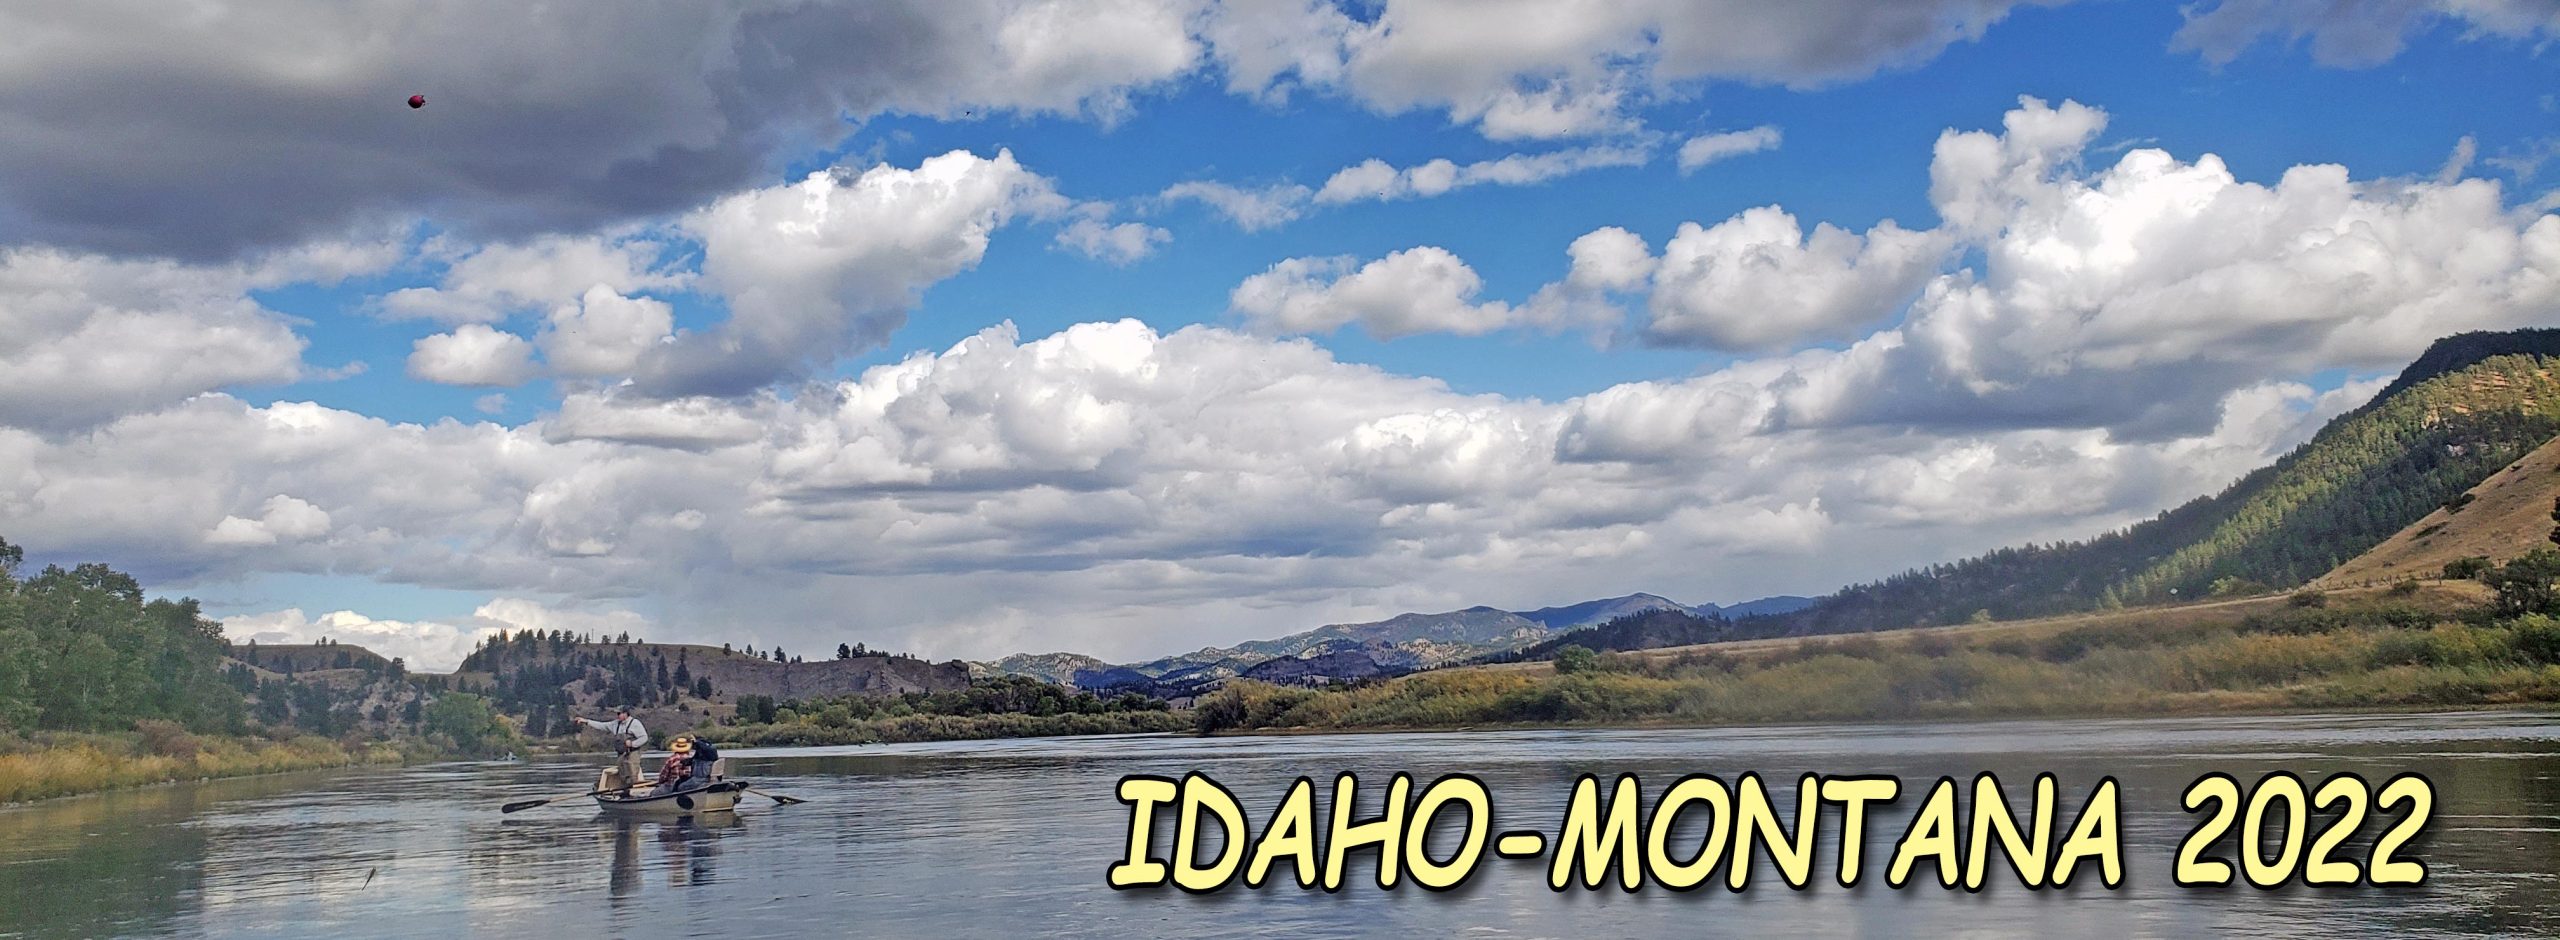 Big Sky And Big Water. Come Join Sky Blue On Our Idaho-Montana Trips This March Or September, 2022. Fish Some Of The Best Waters Such As The Henry's Fork, Yellowstone, Snake, Gallatin, Madison., Clark Fork, Bitterroot, Blackfoot.